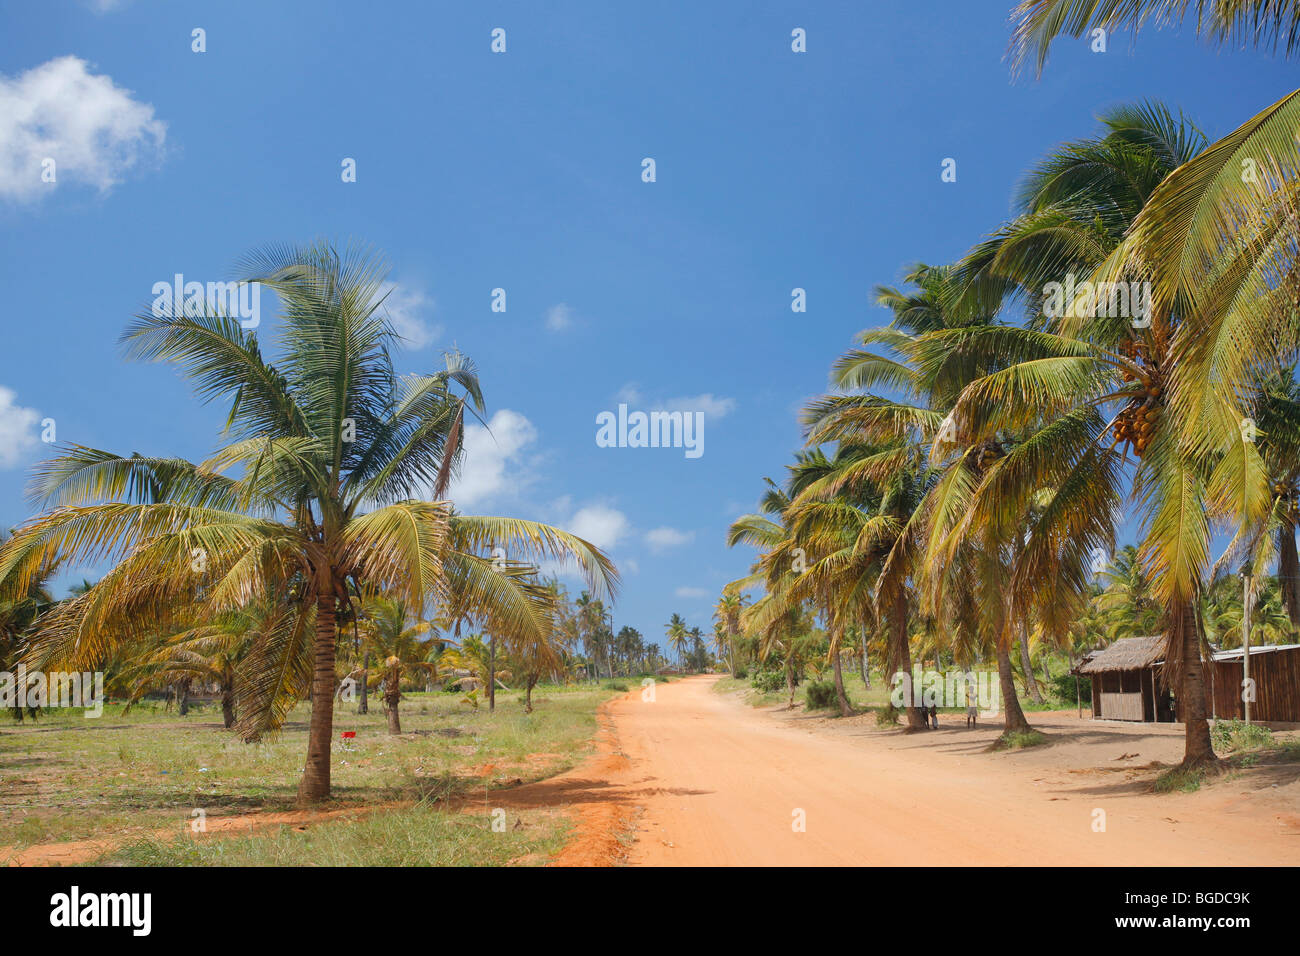 The road to Tofo in Inhambane Province in Southern Mozambique, with coconut palm trees and the characteristic red dirt roads. Stock Photo